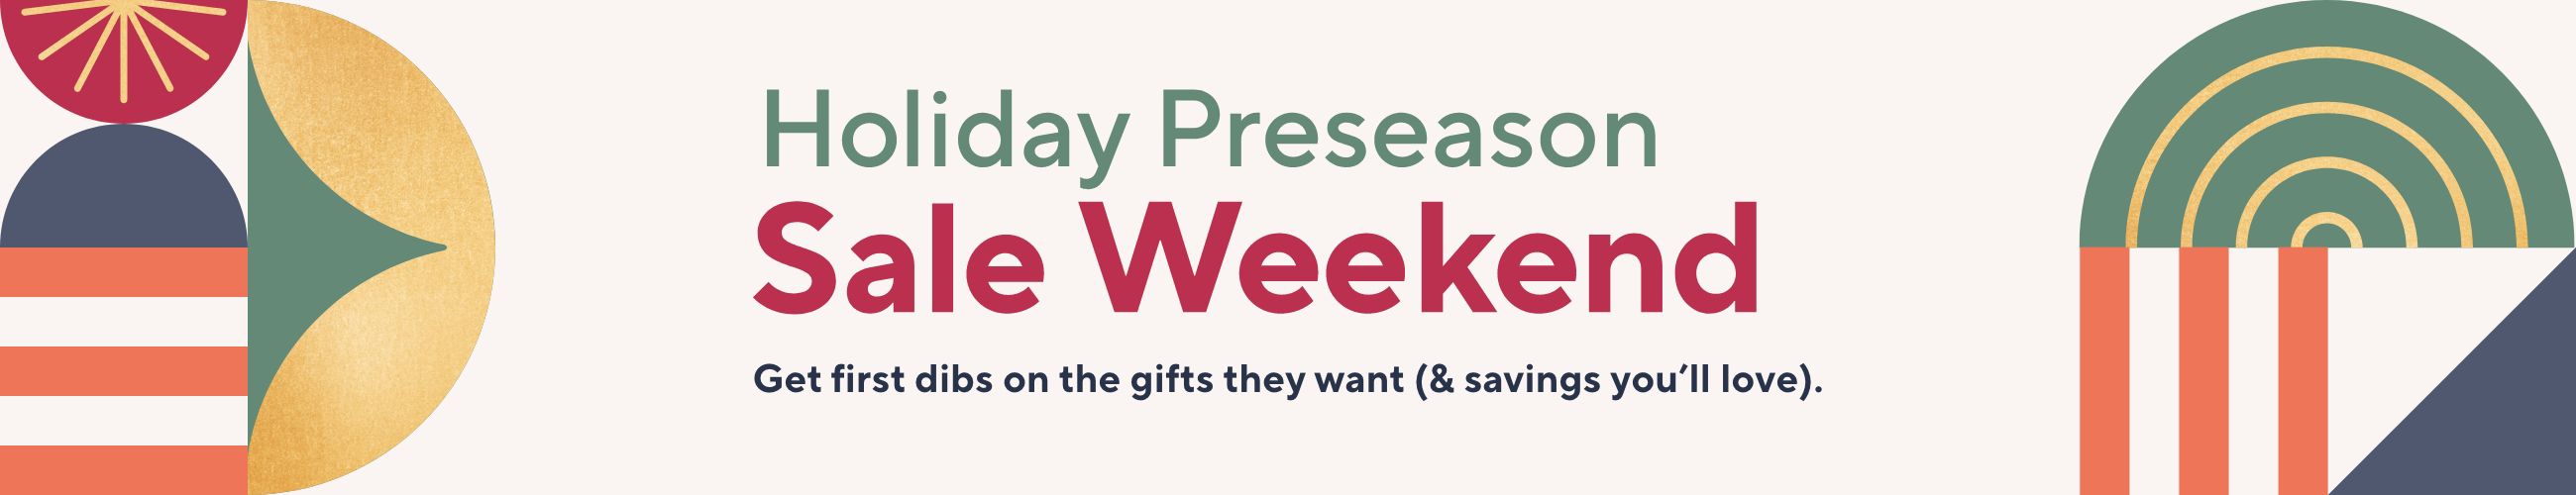 Holiday Preseason Sale Weekend - Get first dibs on the gifts they want (& savings you’ll love).